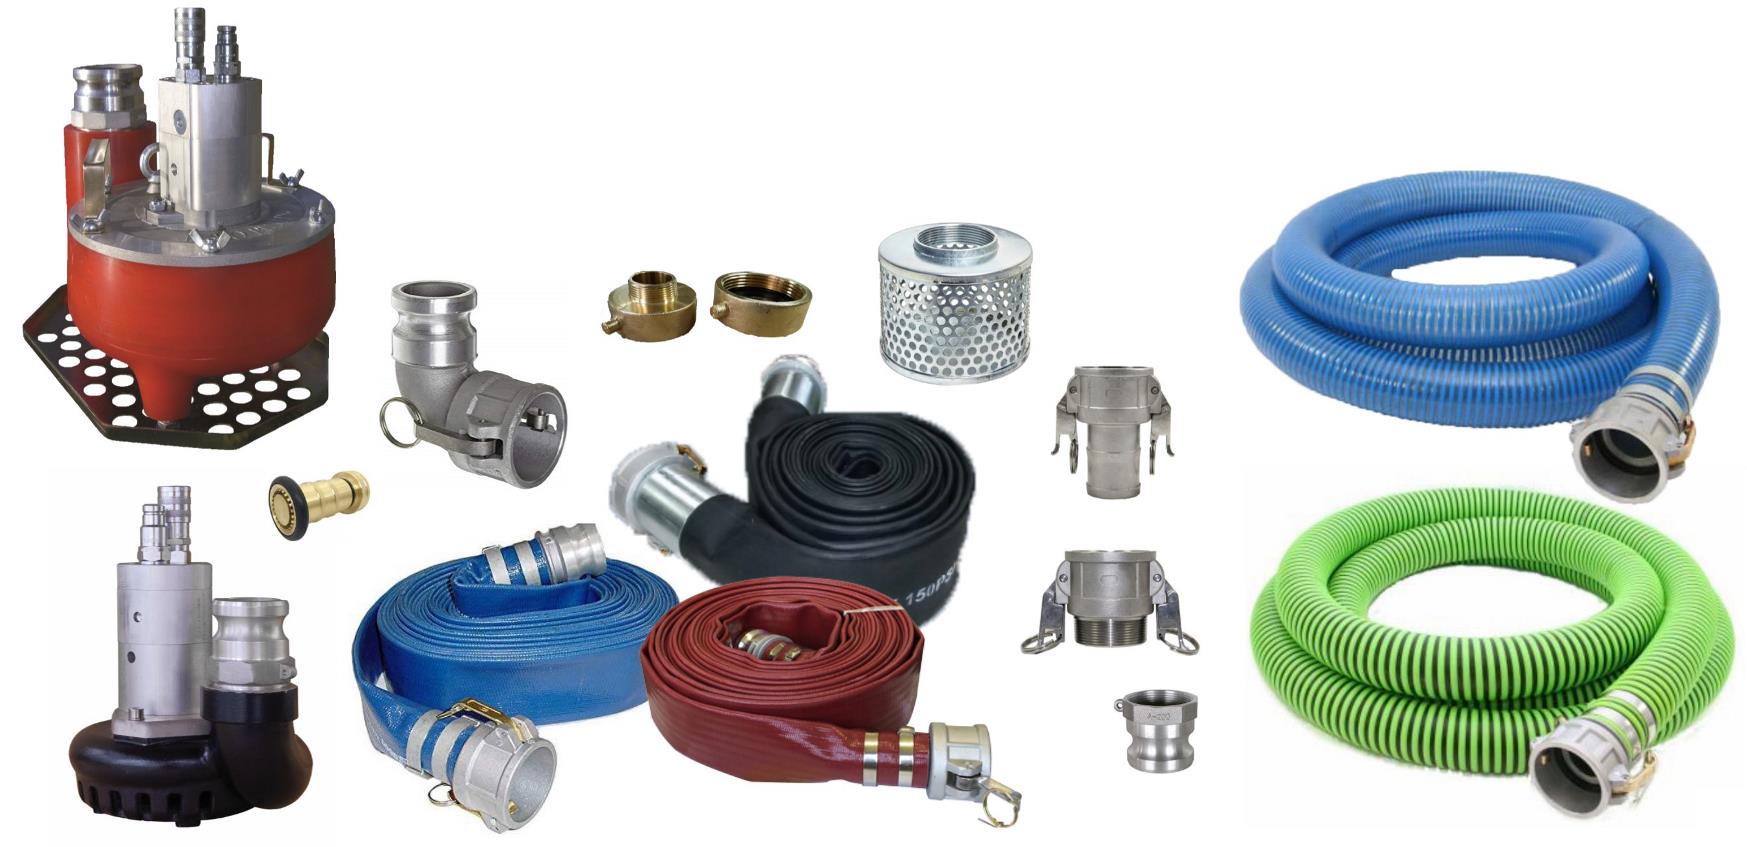 We Distribute Various Equipments and Accessories for Pumping and Spraying.

HYDRAULIC WATER PUMPS, HOSES, FITTINGS, ACCESSORIES
